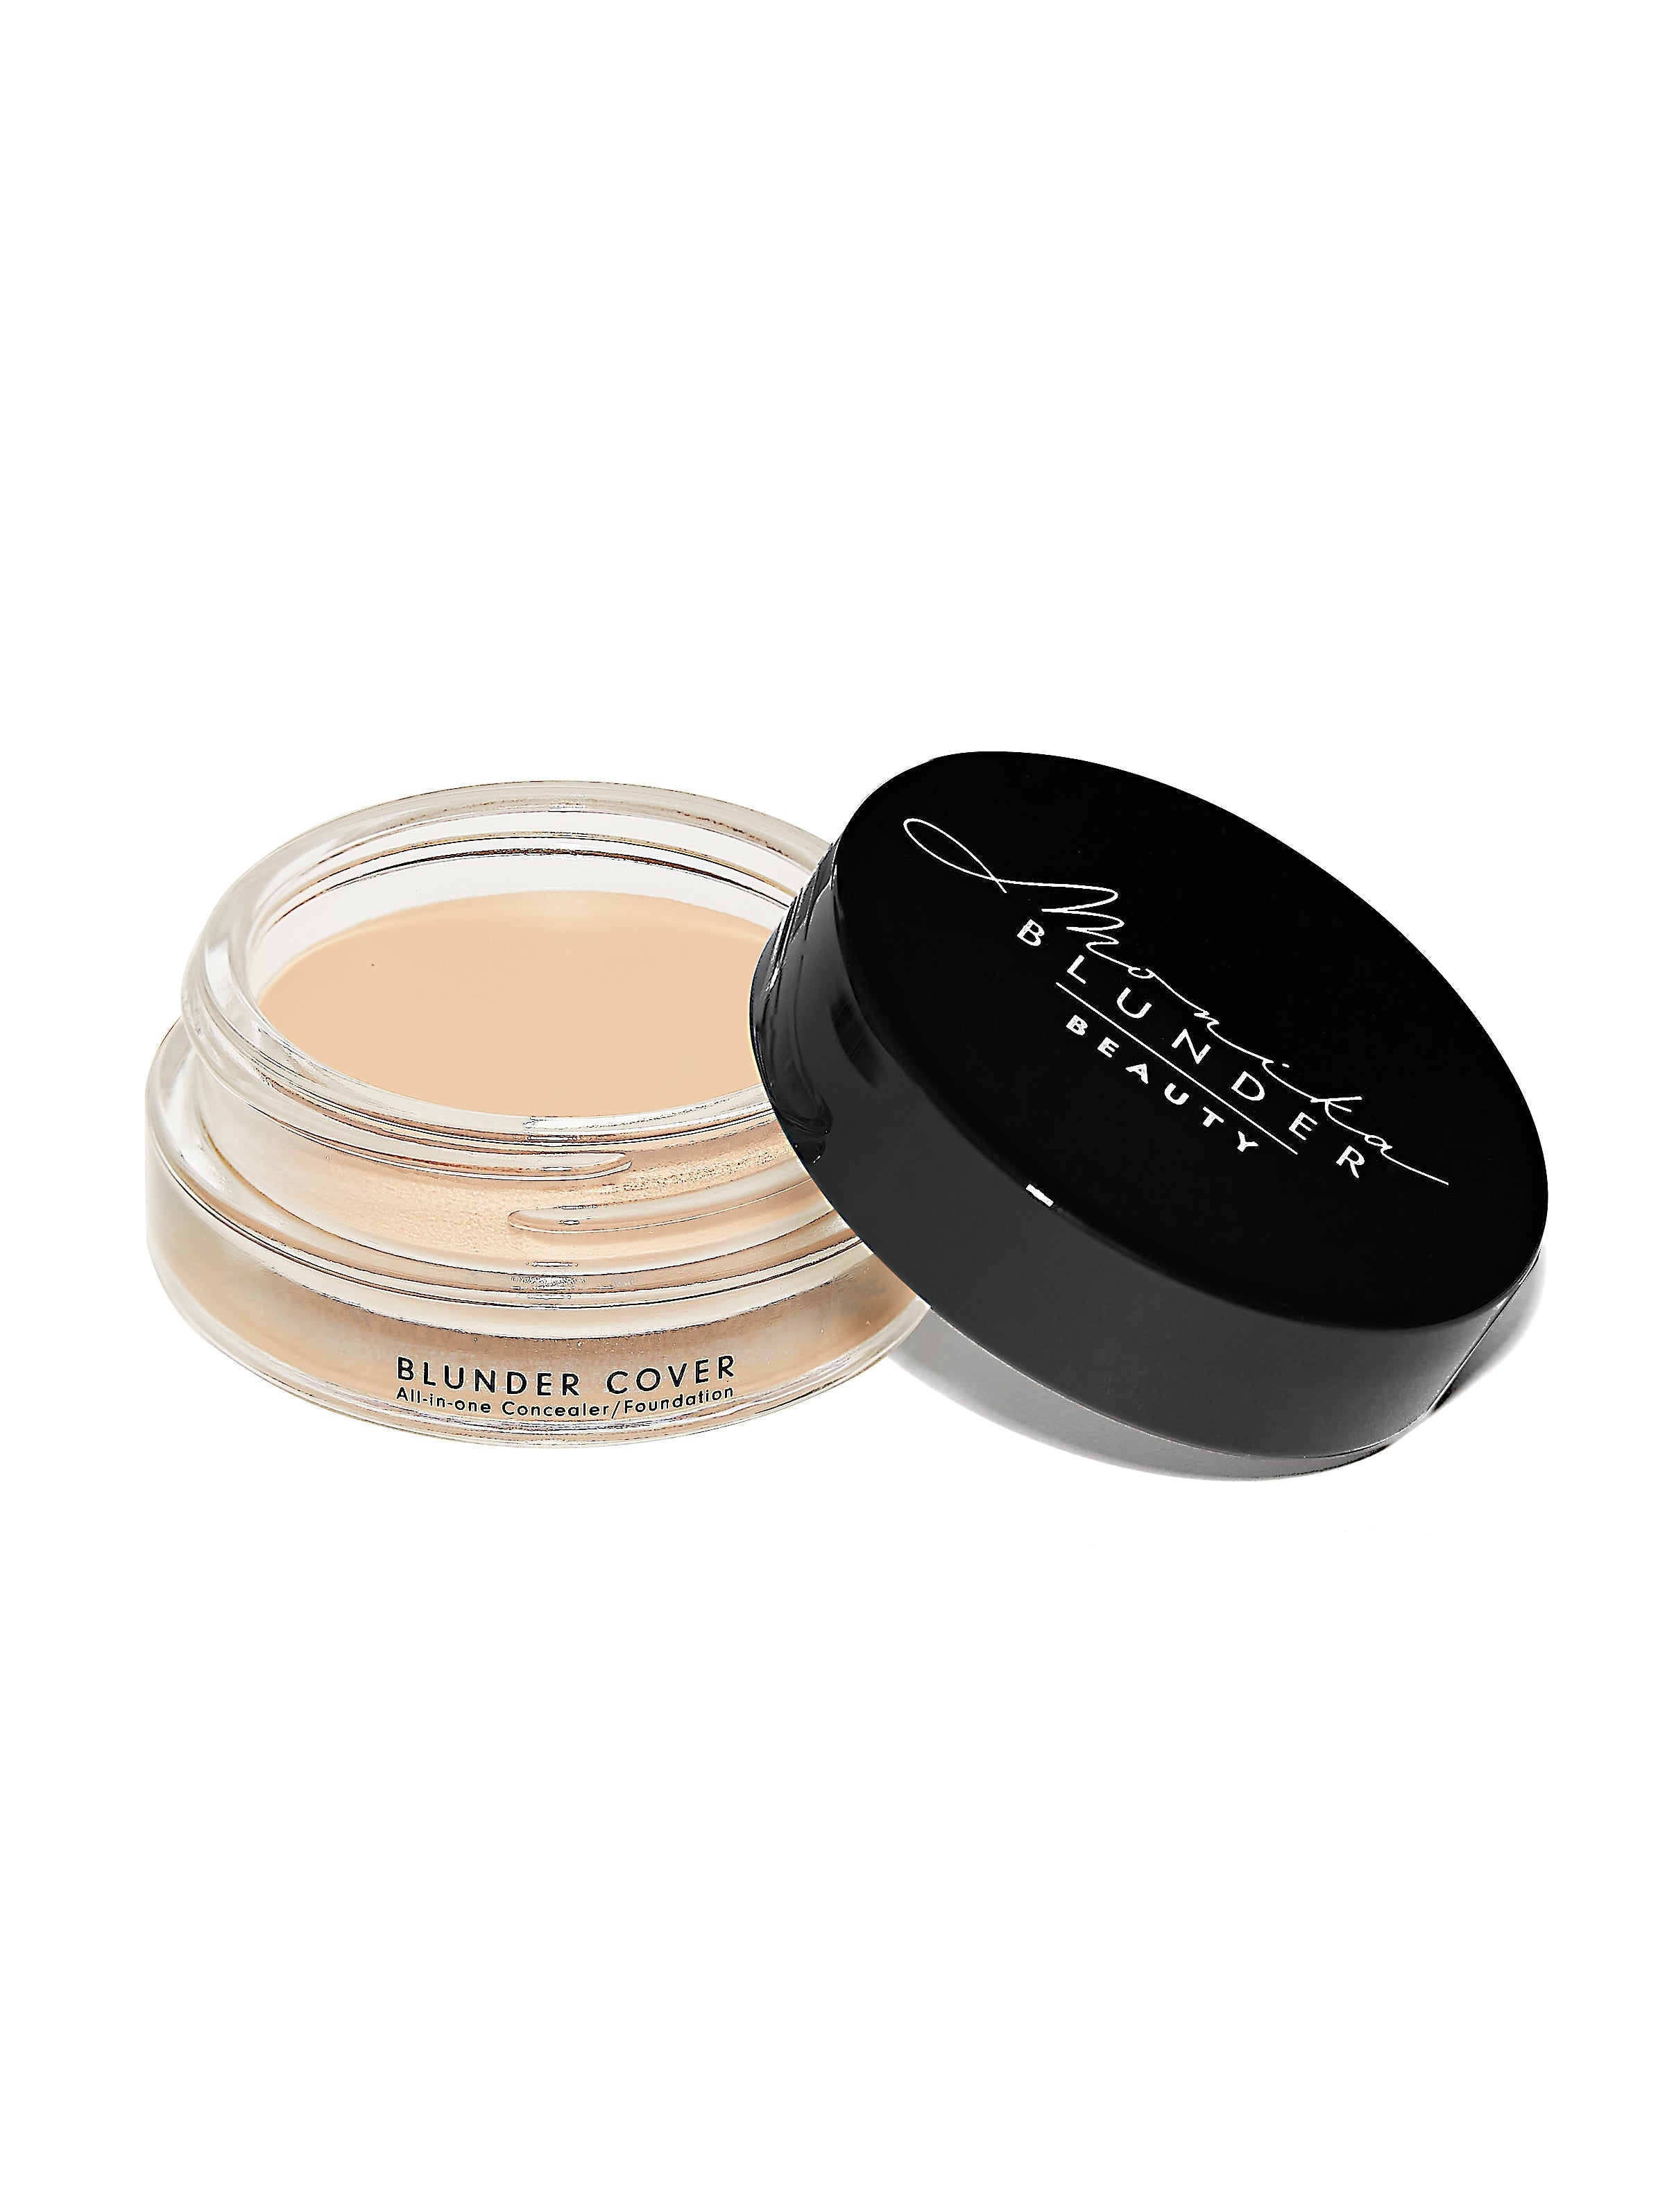 Blunder Cover an All-In-One Foundation/Concealer Shade - Zwei - 0